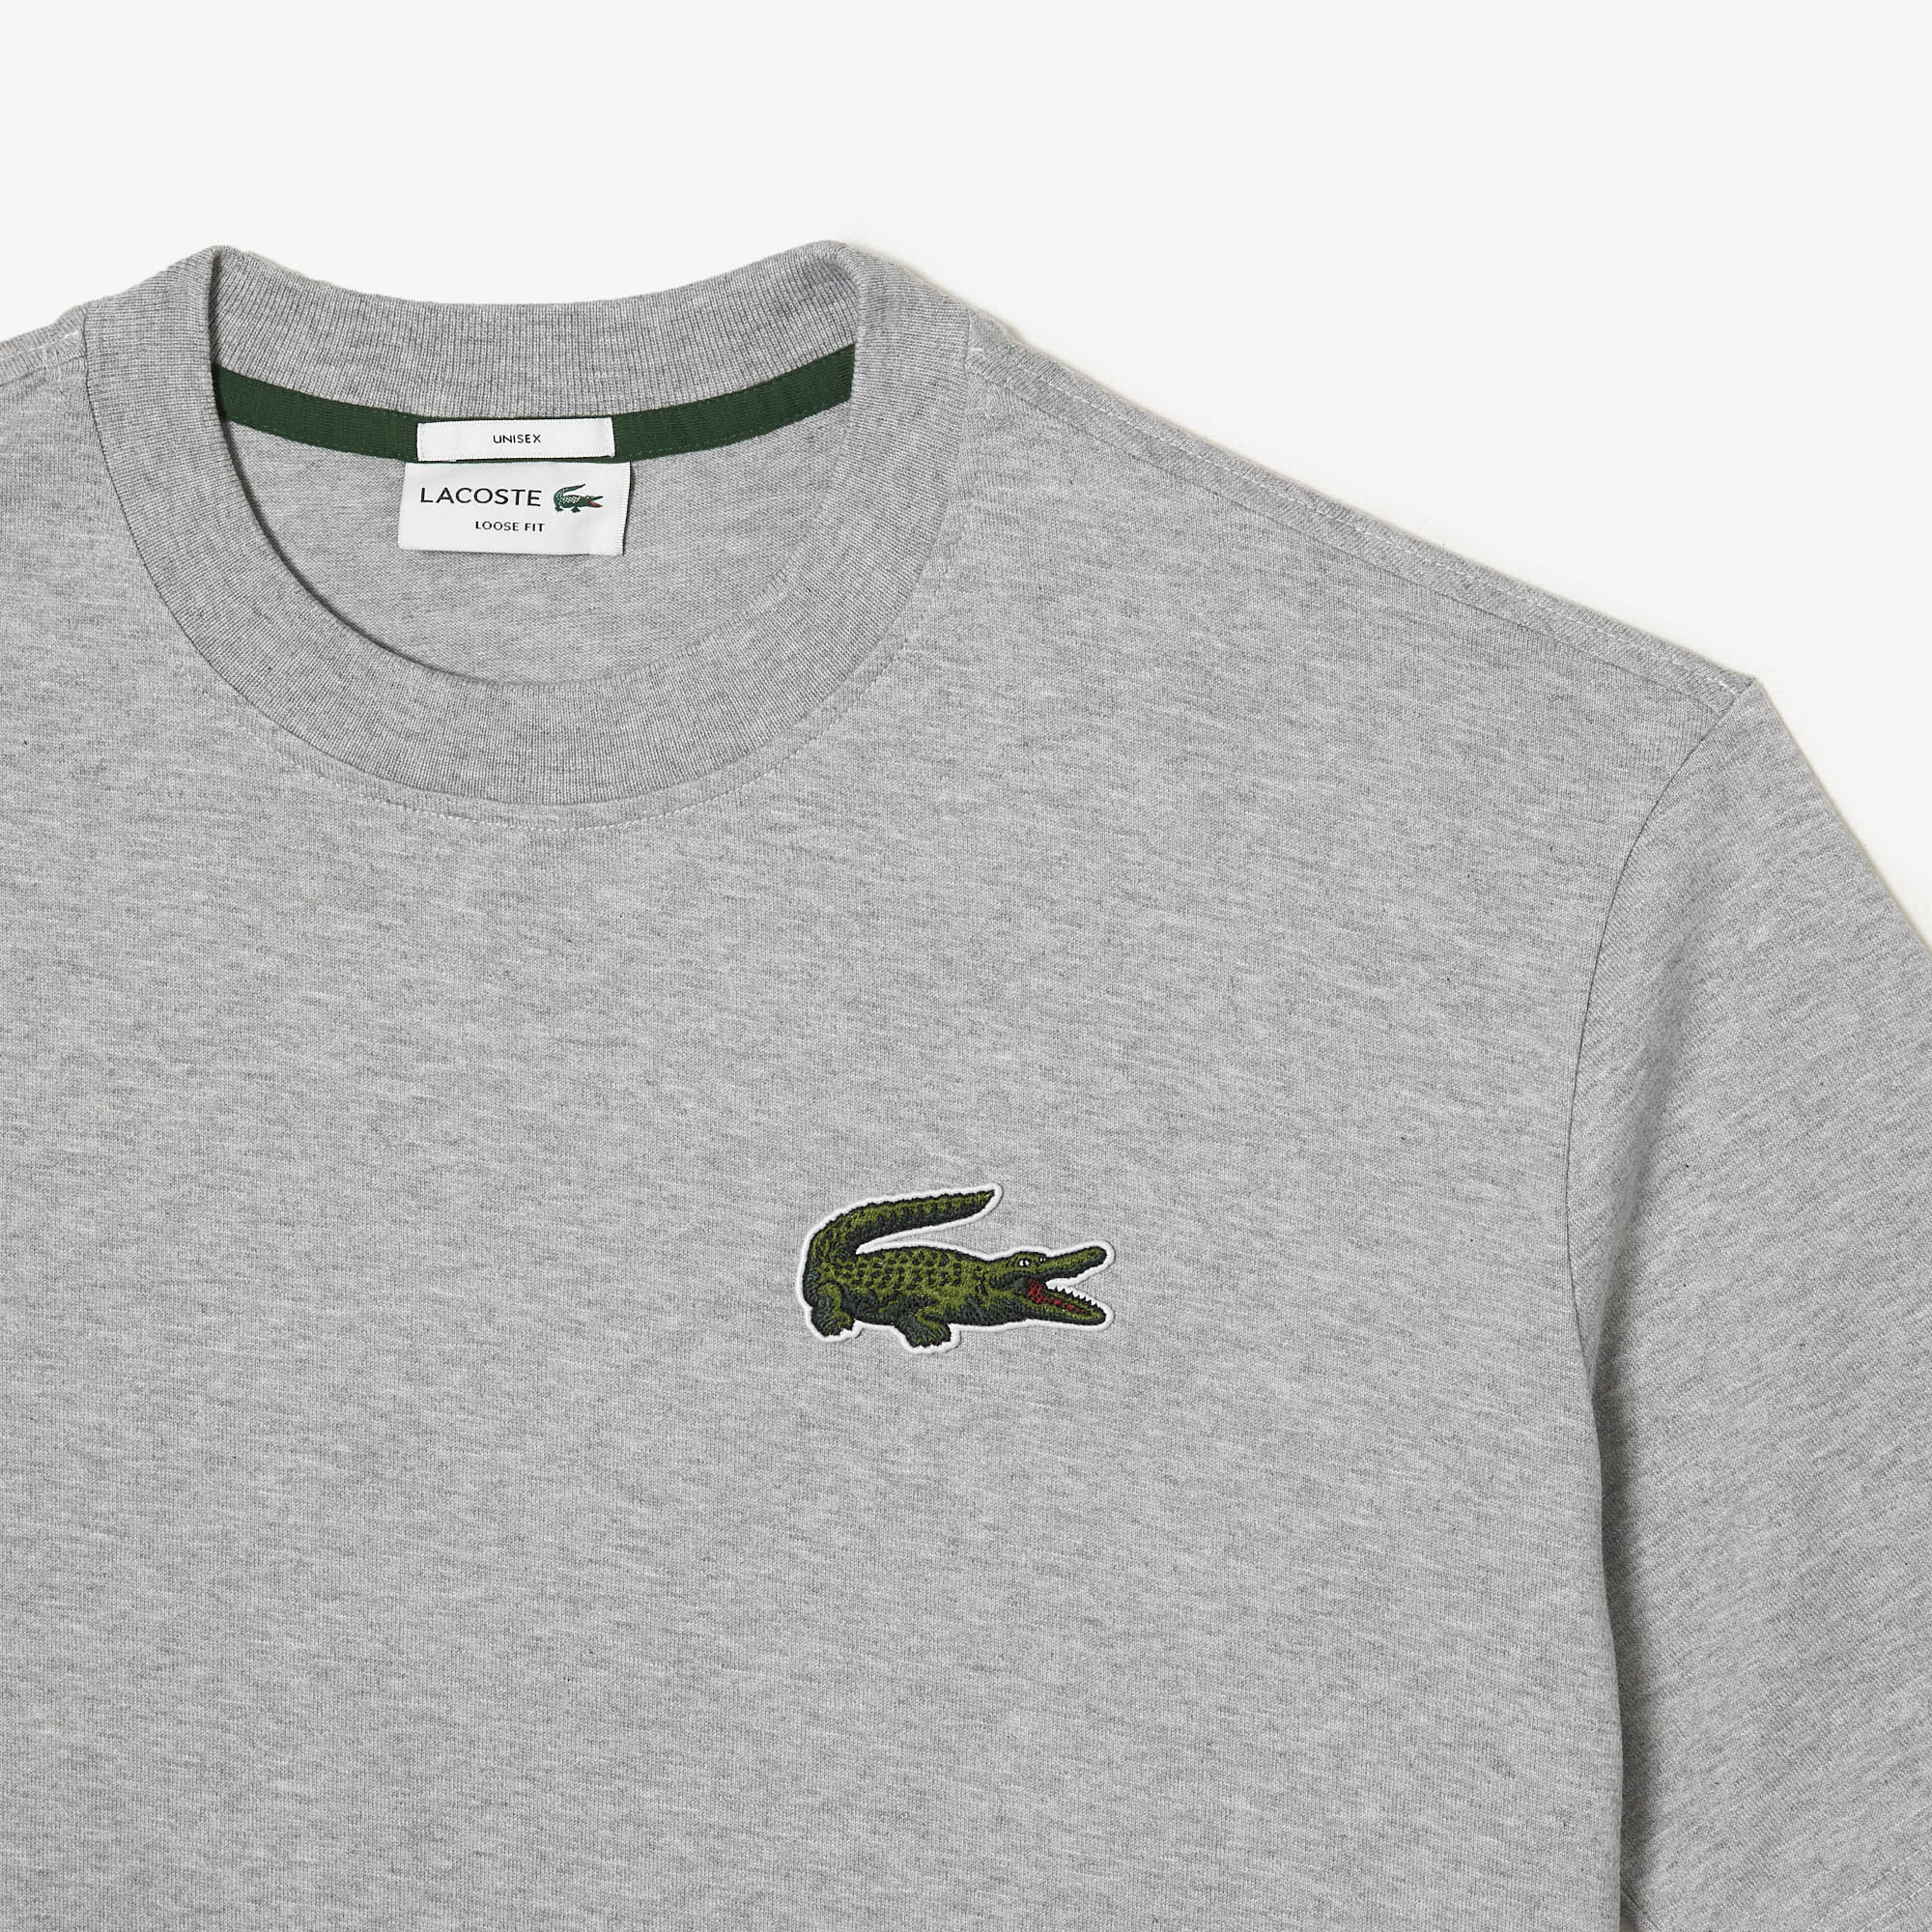 Lacoste Unisex Loose Fit Large Crocodile Organic Cotton T-Shirt Grey Chine TH0062 CCA